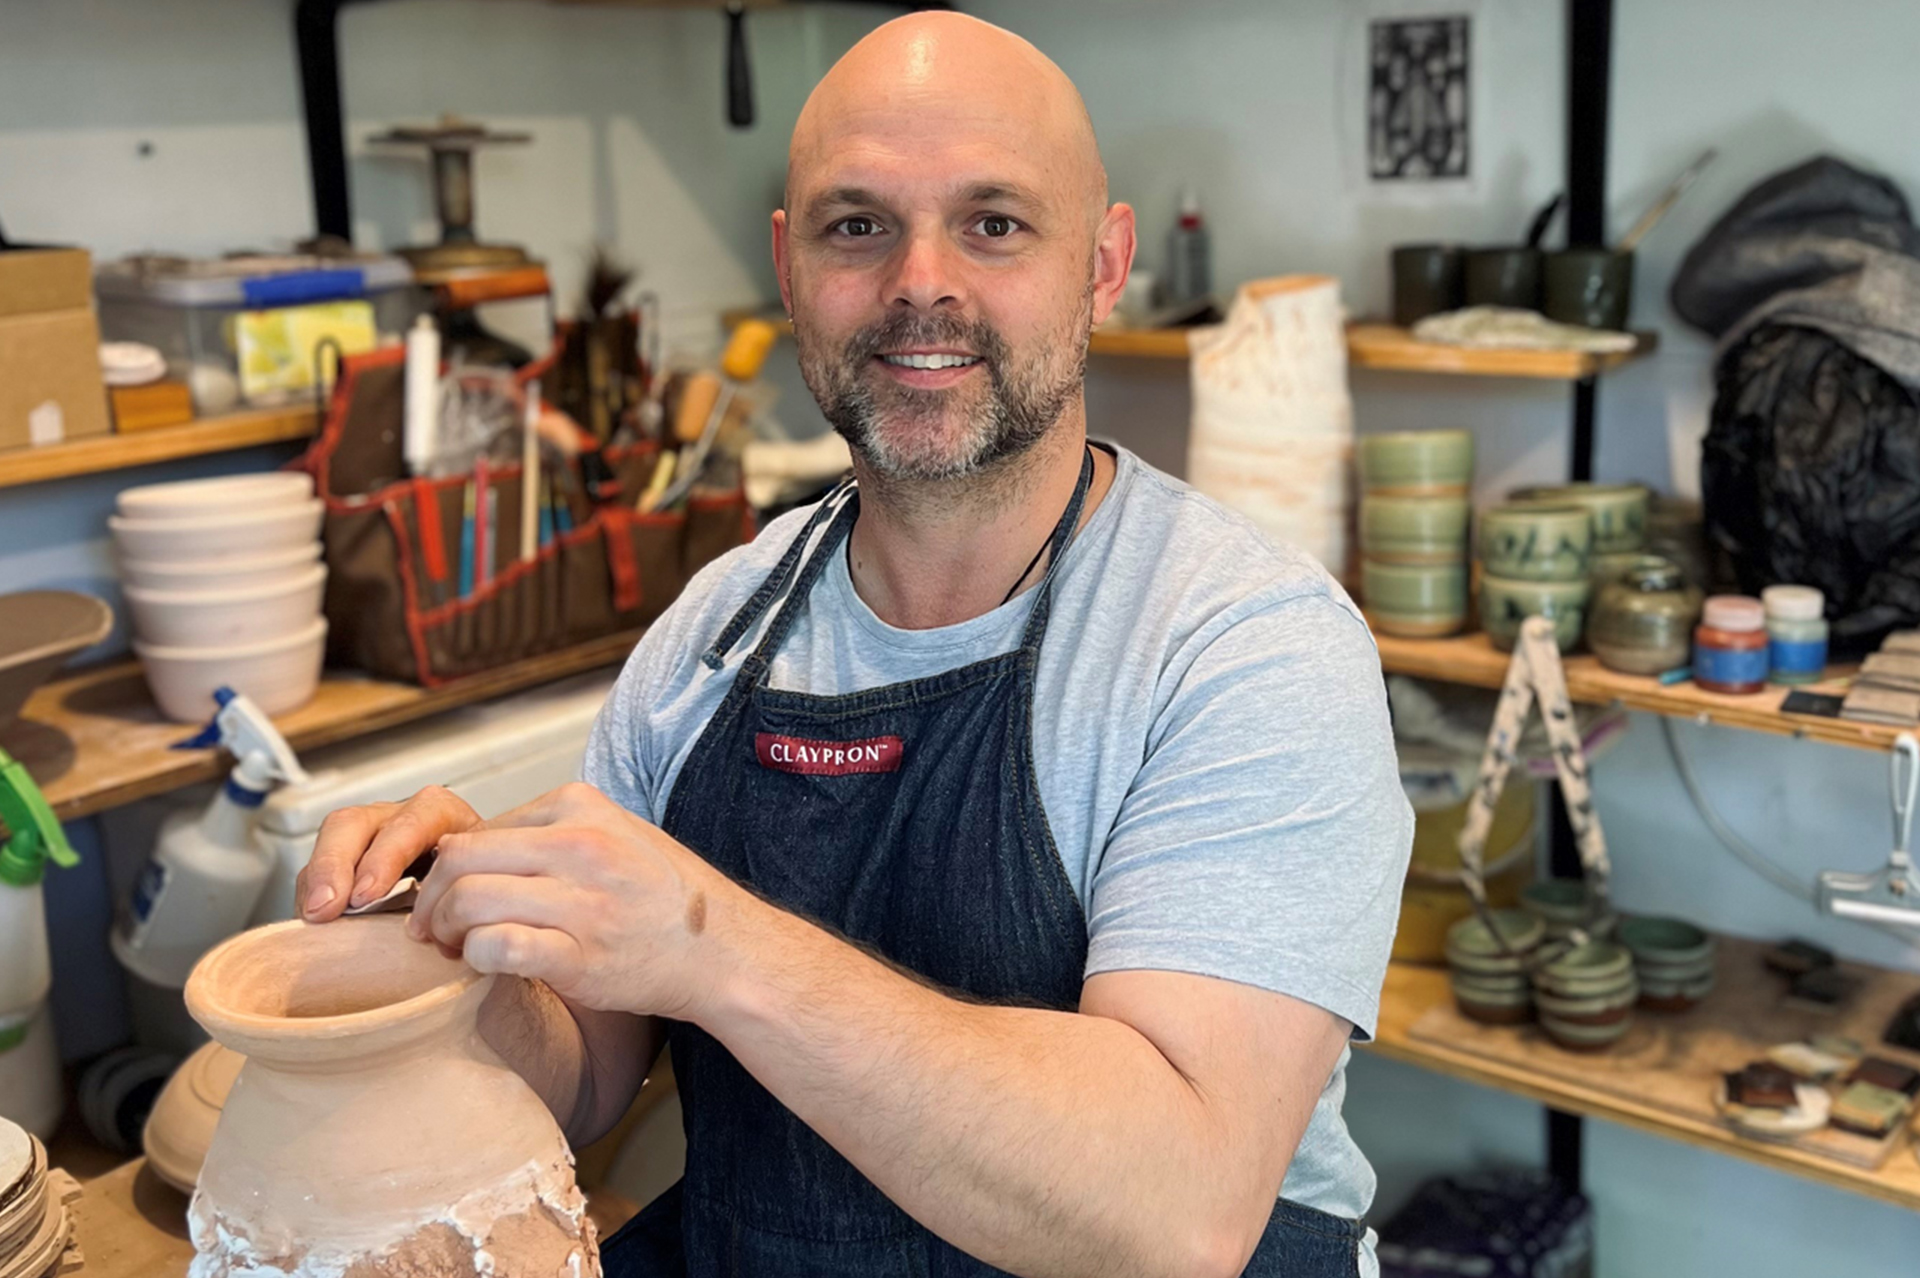 A man wearing a light blue t-shirt and a dark apron sitting in a ceramics studio with his hands resting on a large pot. Ha has no hair and is smiling at the camera.